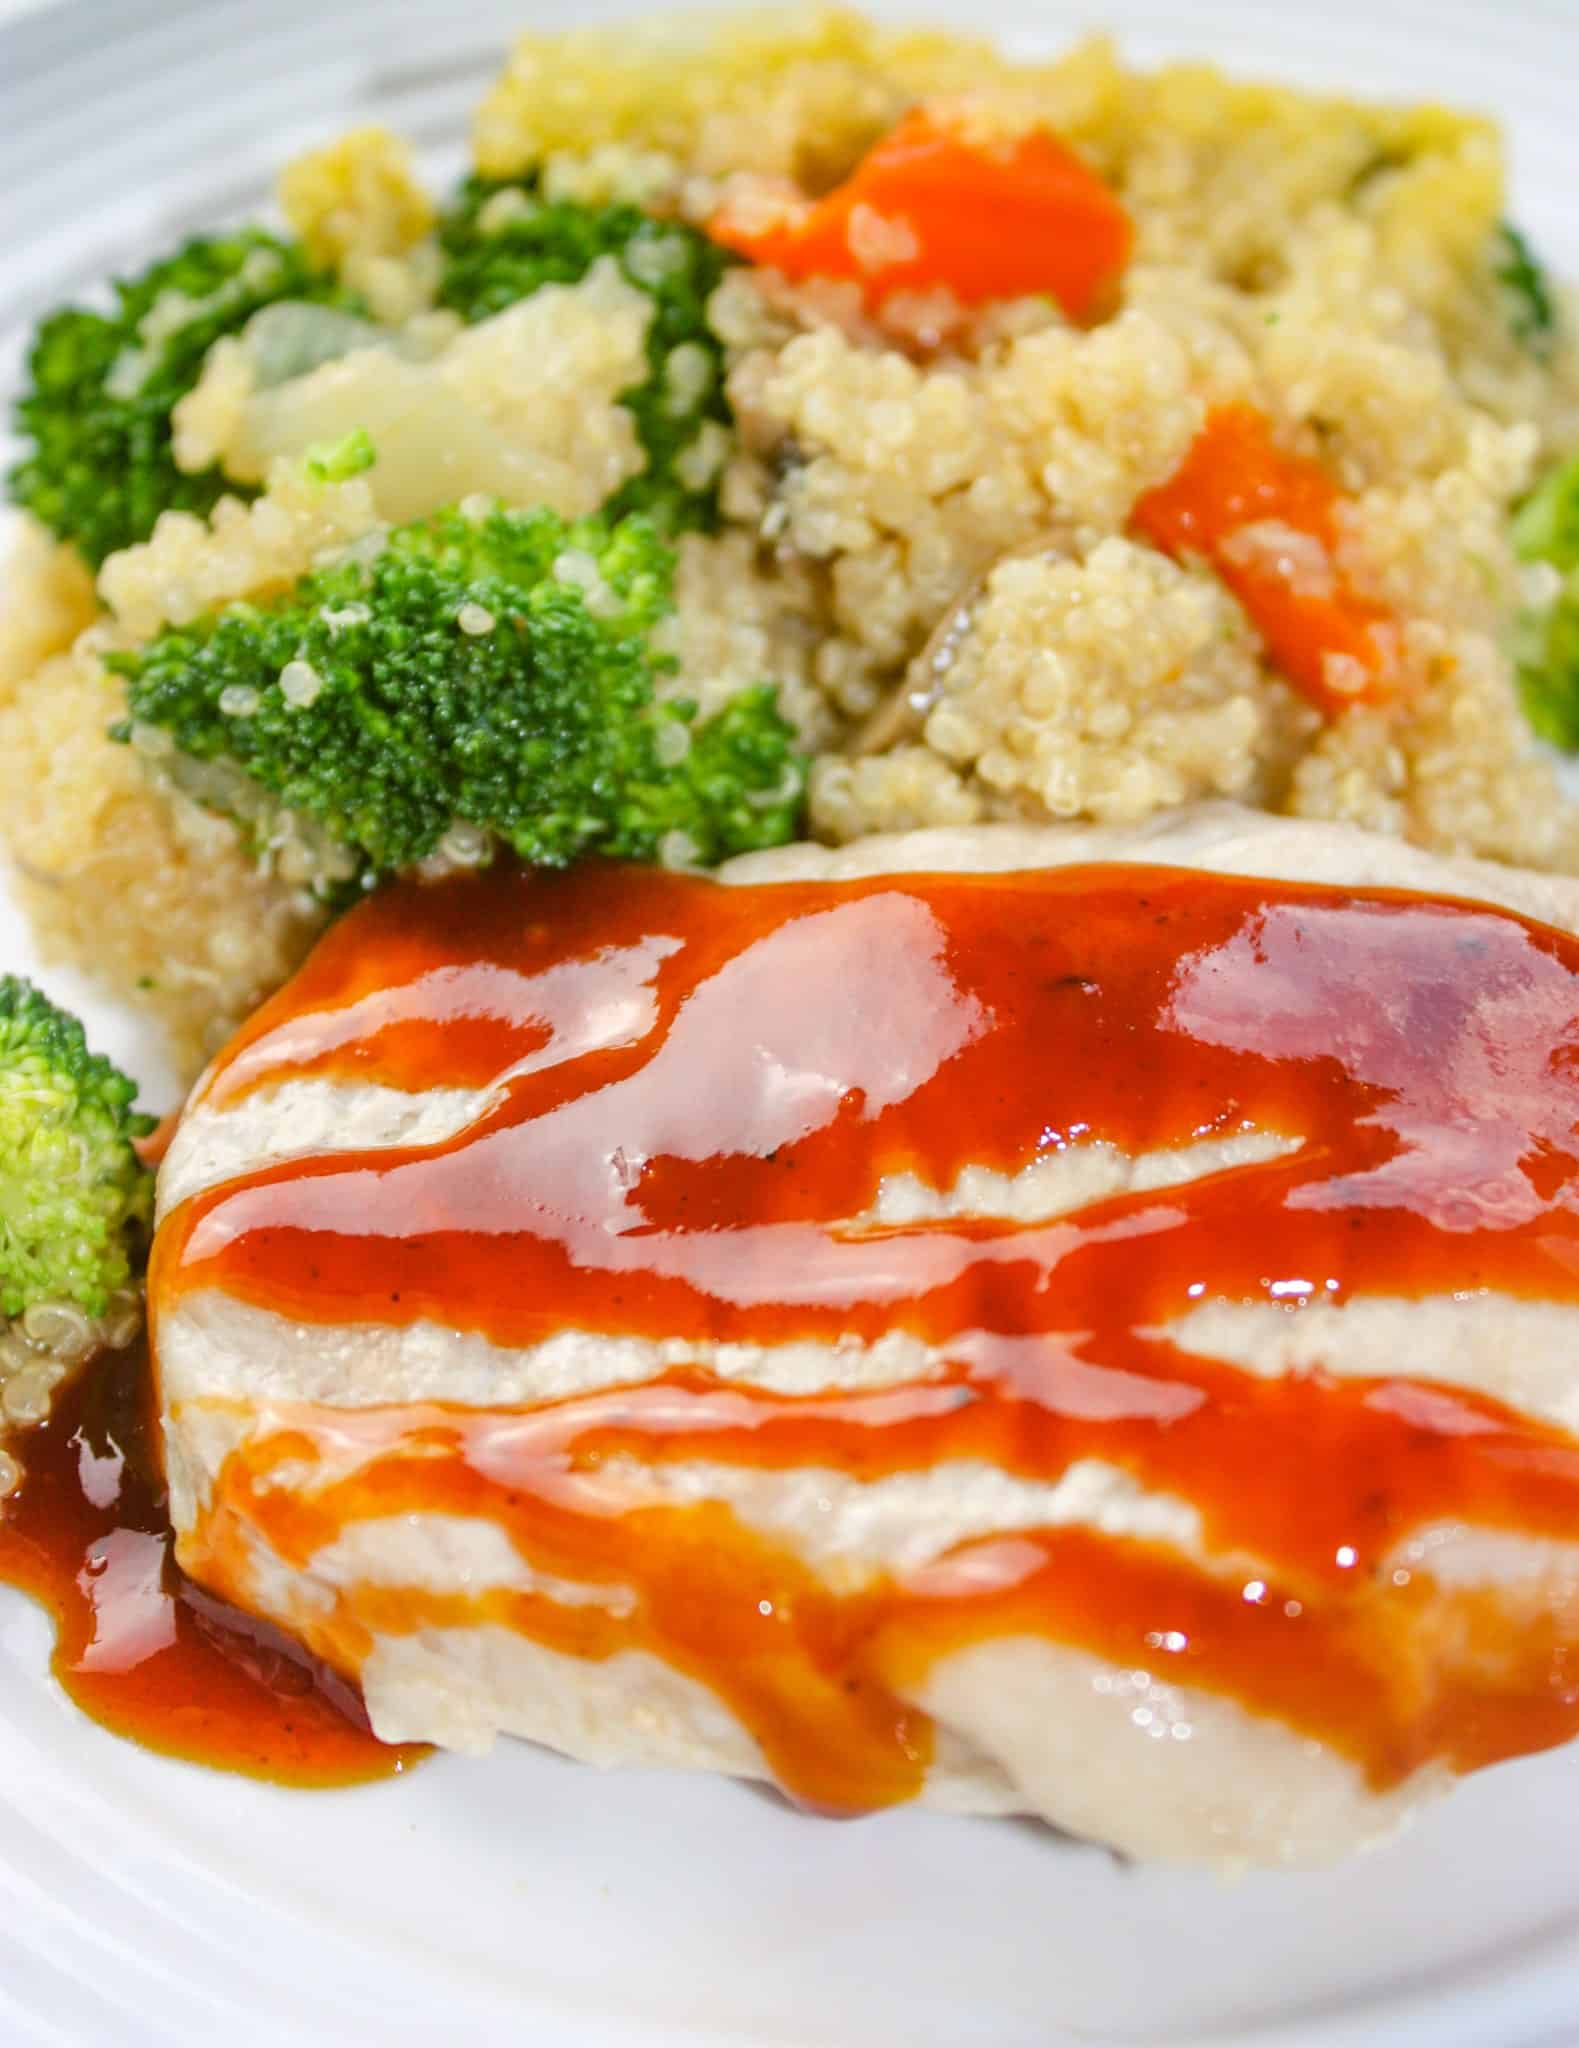 Instant Pot Pork Chops and Loaded Quinoa is an easy pressure cooker recipe that allows you to cook your whole meal at once.    Quinoa, loaded with vegetables, and pork chops, smothered in BBQ sauce, provide a wholesome, flavourful dinner for your whole family.